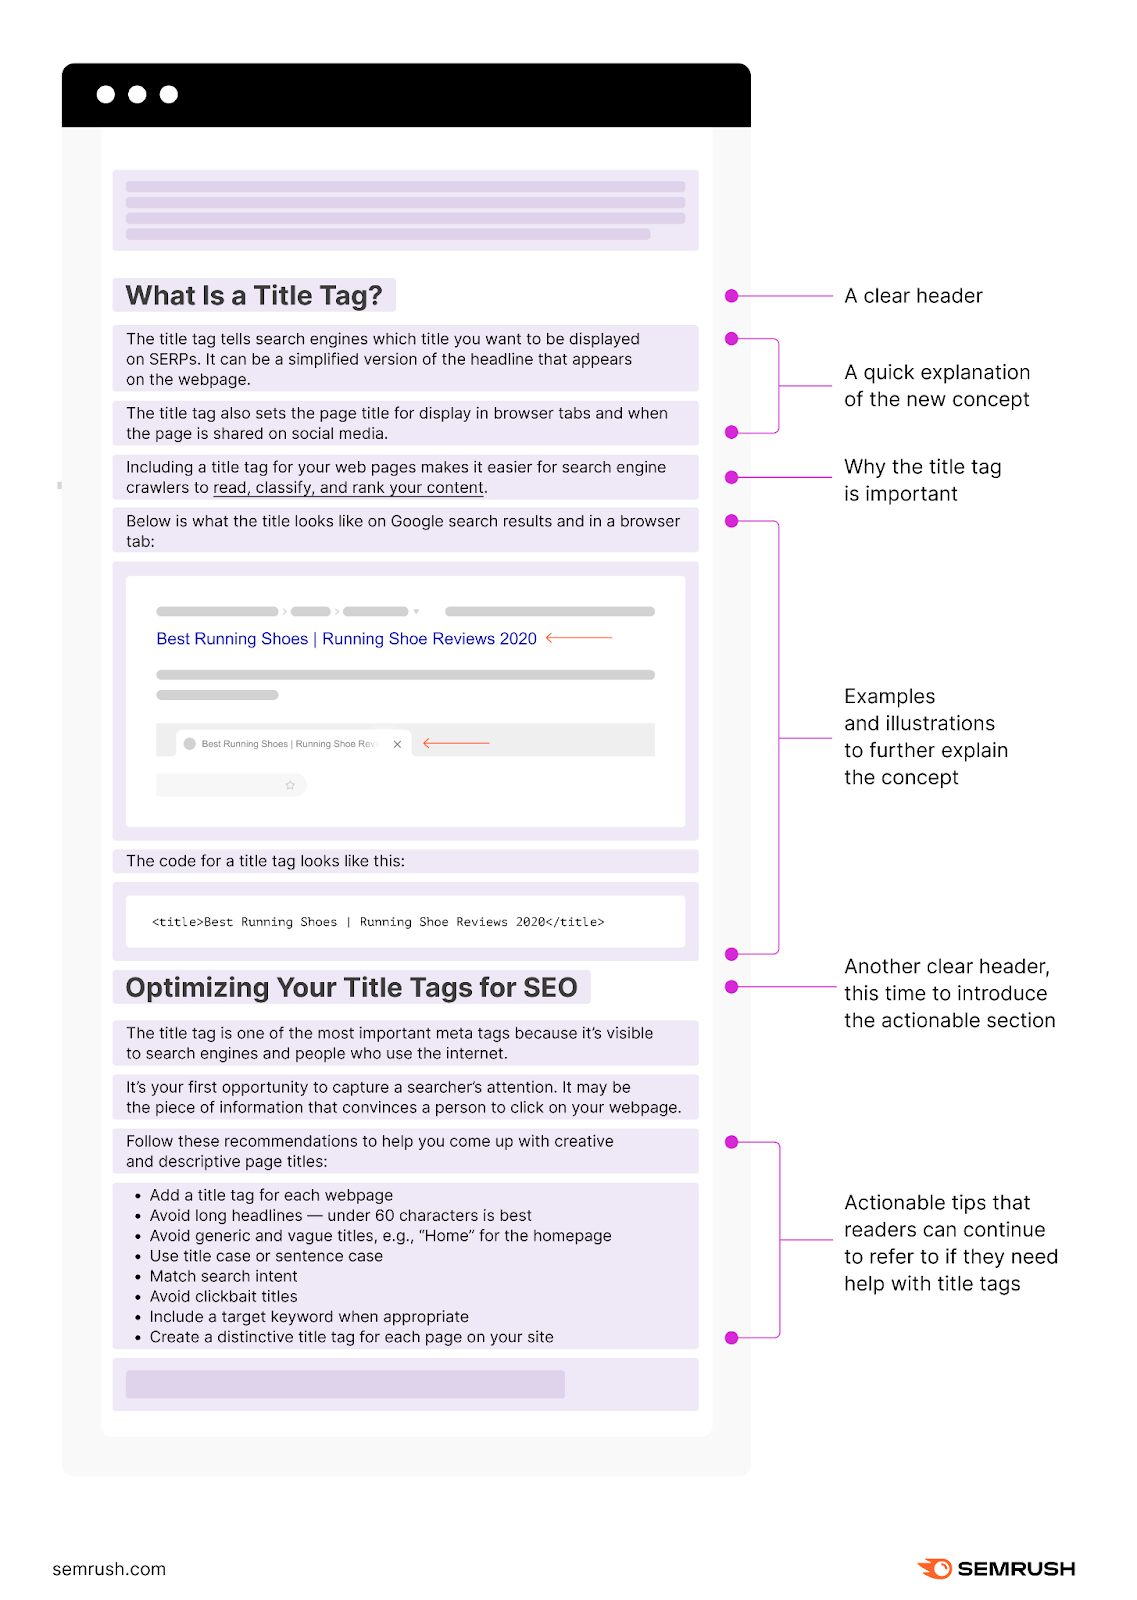 An infographic explaining elements of “What Is a Title Tag” and "Optimizing Your Title Tags for SEO" sections